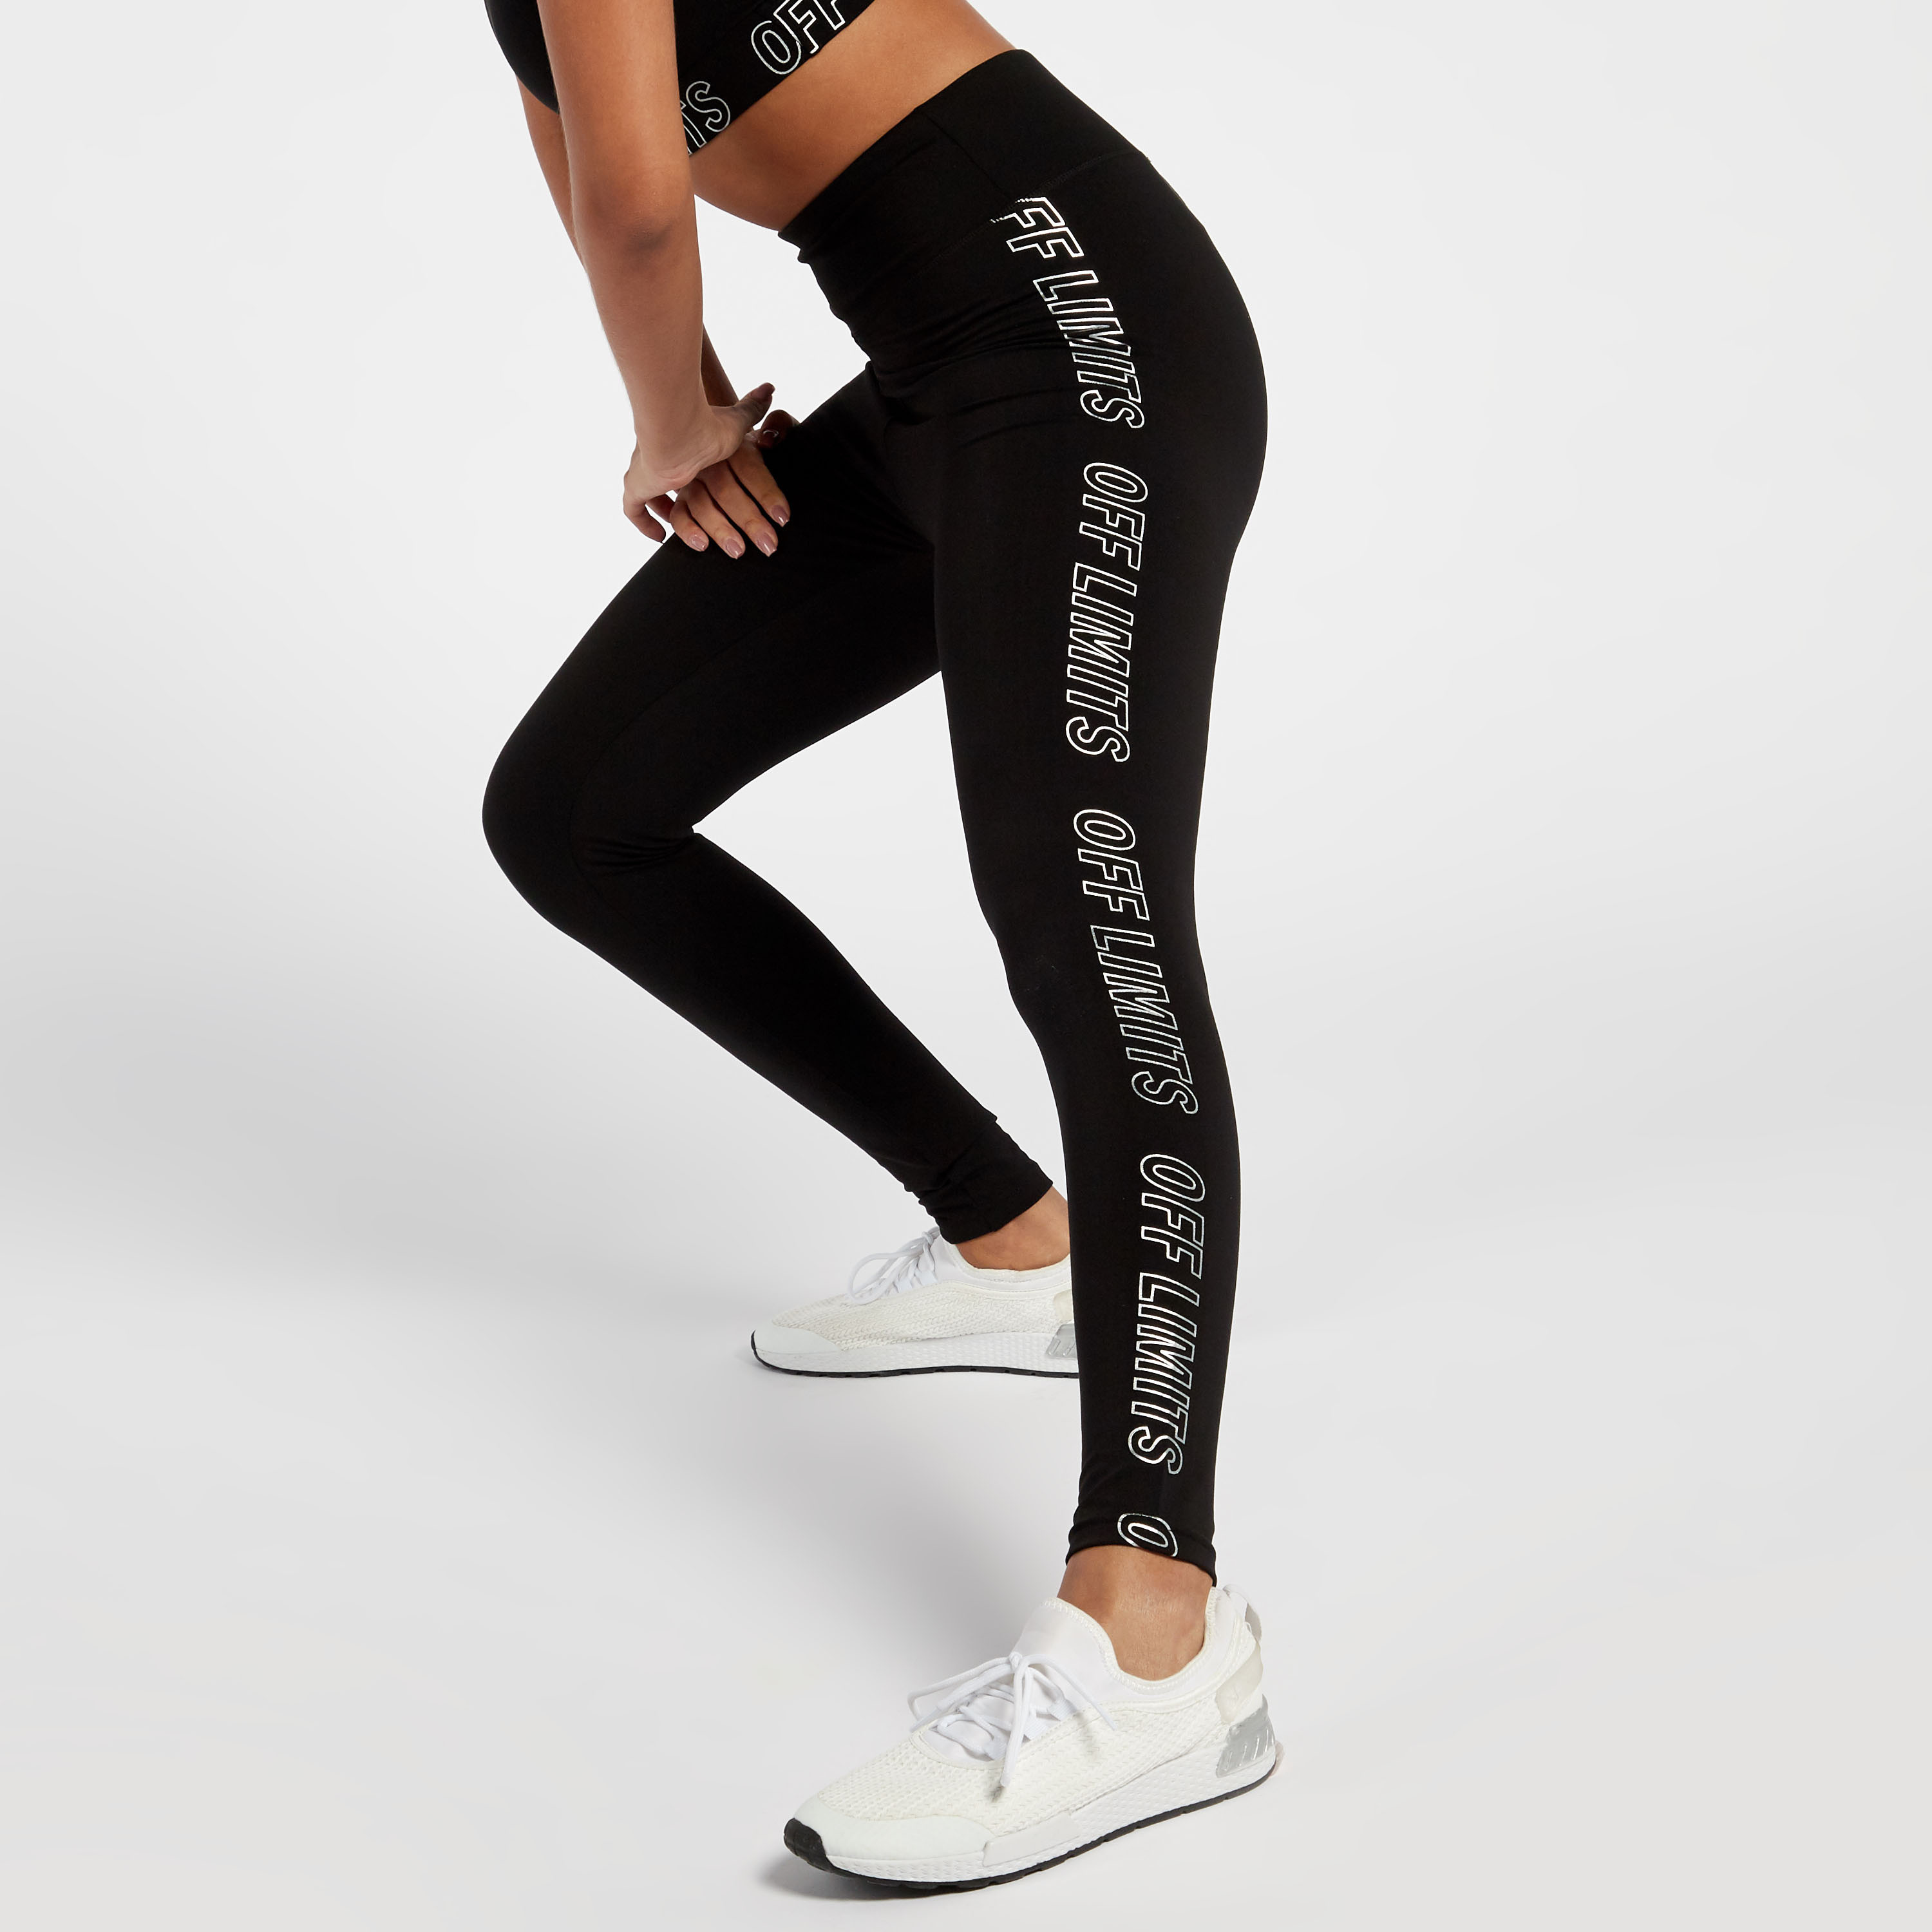 Buy best quality Women's jeggings online at Beyoung at a low price. #mumbai  #delhi #pune #chennai #udaipur #tshirts #fri… | Womens jeggings, Jeggings,  Girls tshirts